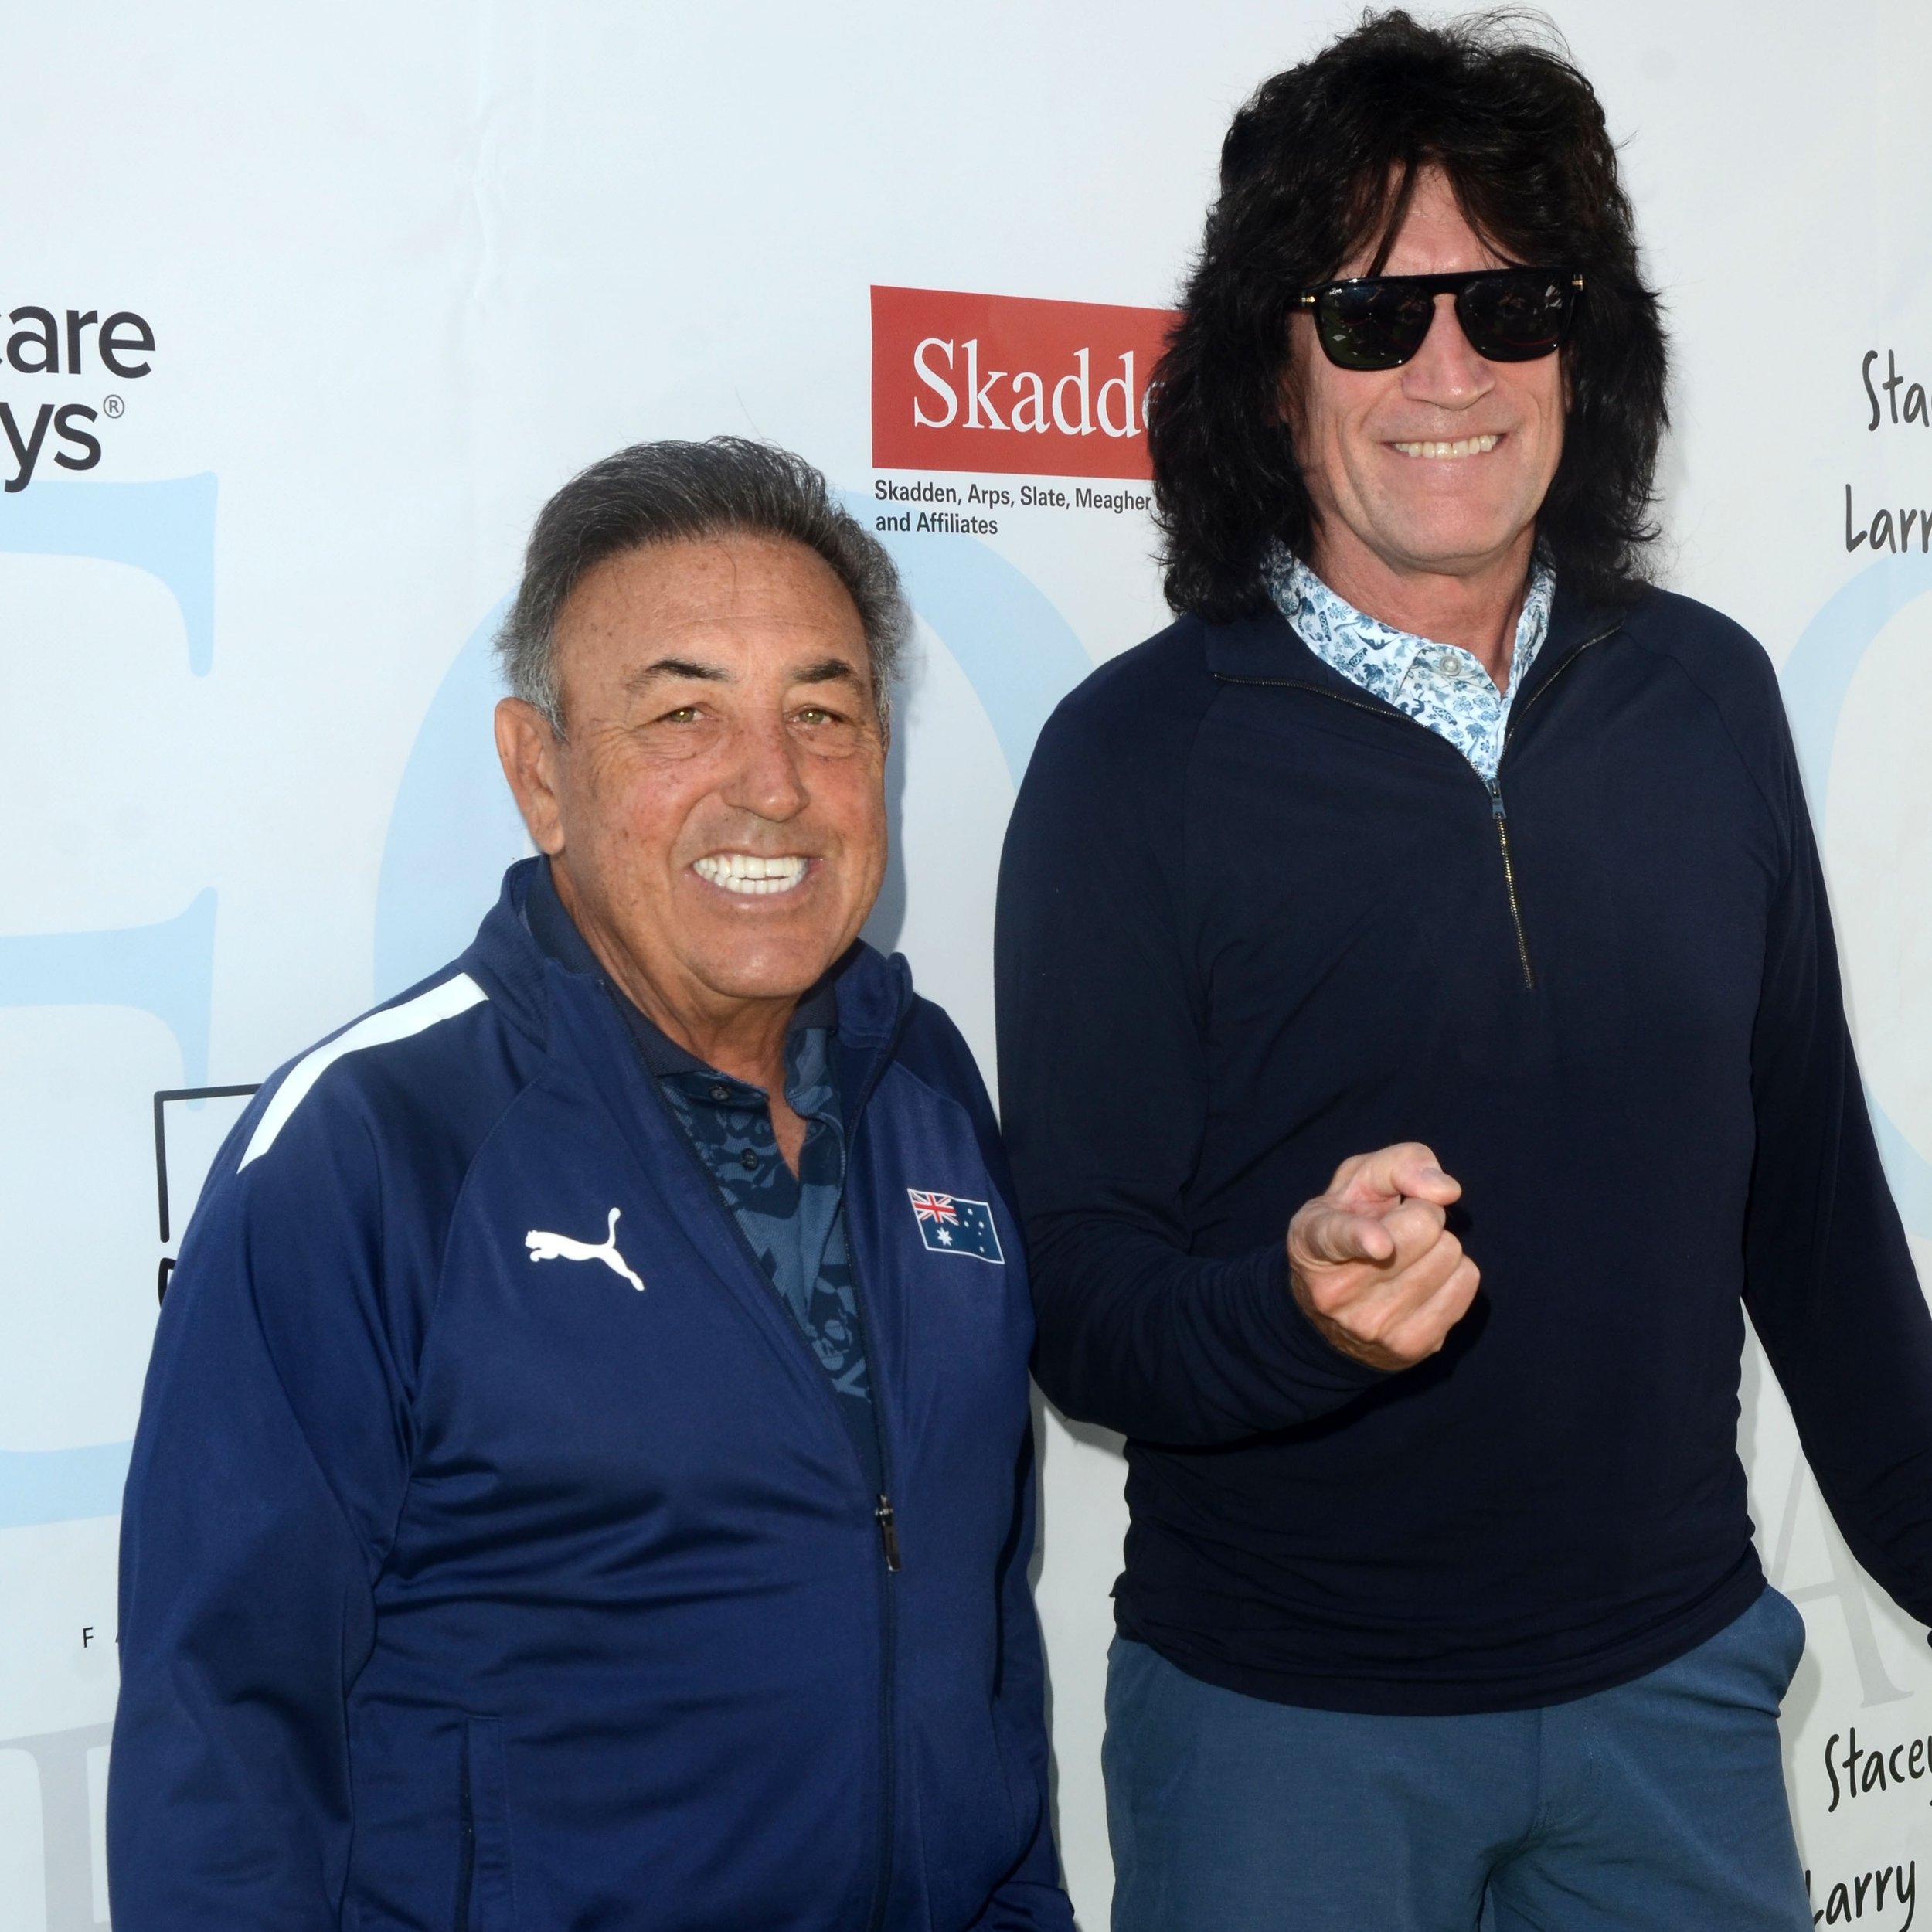 Wonderful to see the legendary Tommy Thayer and Doc McGhee coming out to support the 17th Annual George Lopez Celebrity Golf Classic!! KISS has been one of our biggest supporters and we cannot thank you enough 💚💙

#GiveBack&nbsp;#KISS #KISSFans #gi